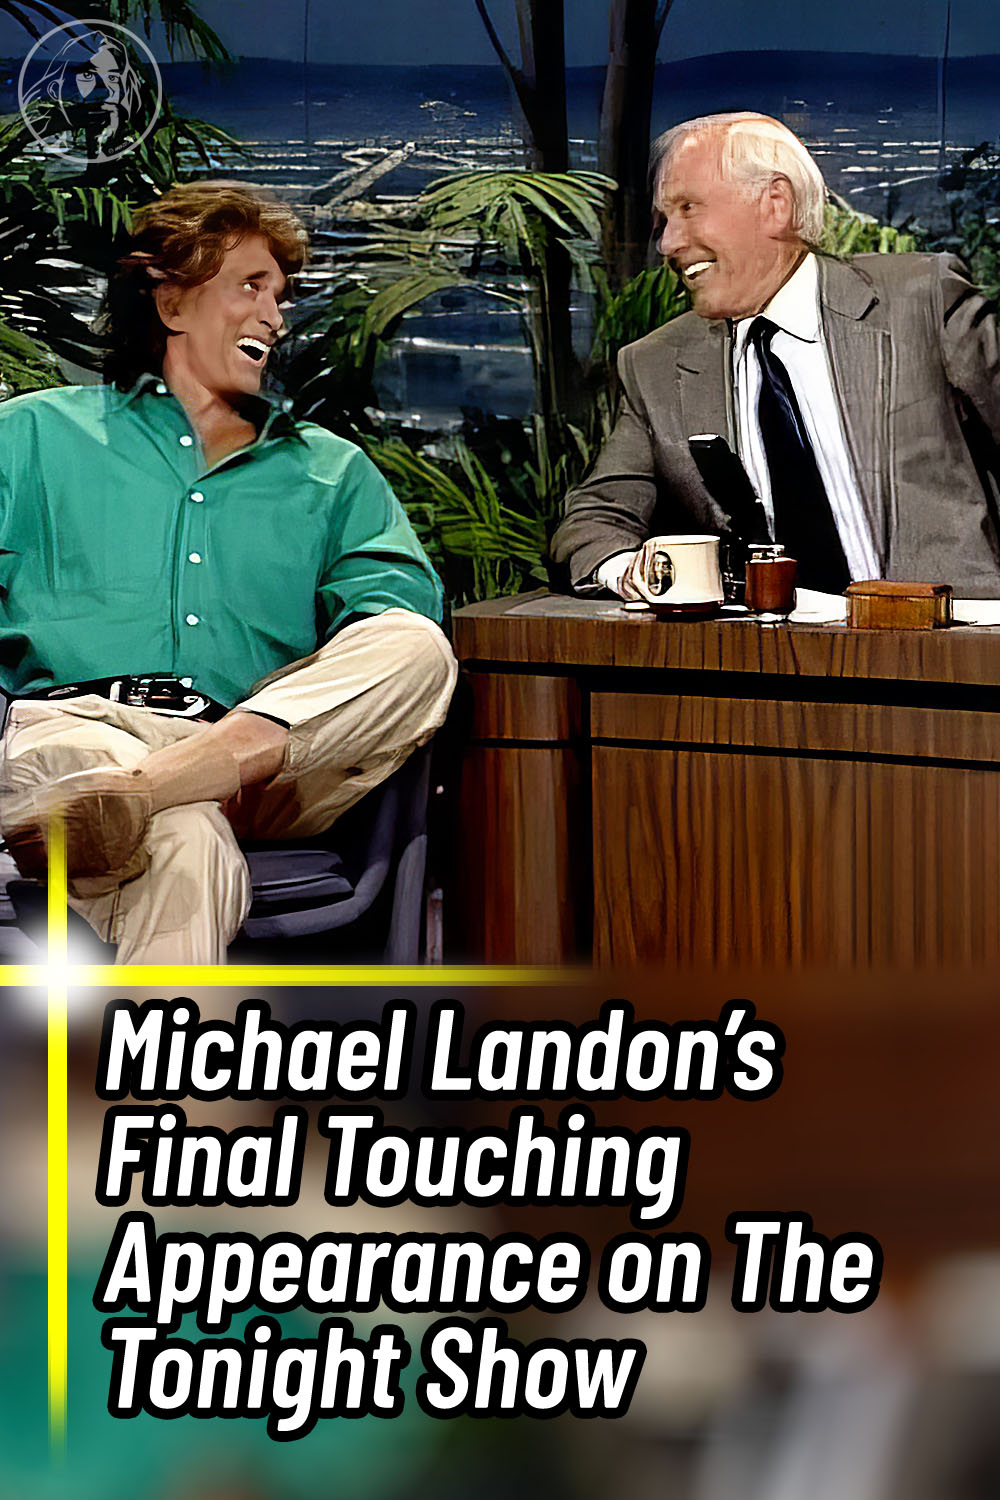 Michael Landon’s Final Touching Appearance on The Tonight Show